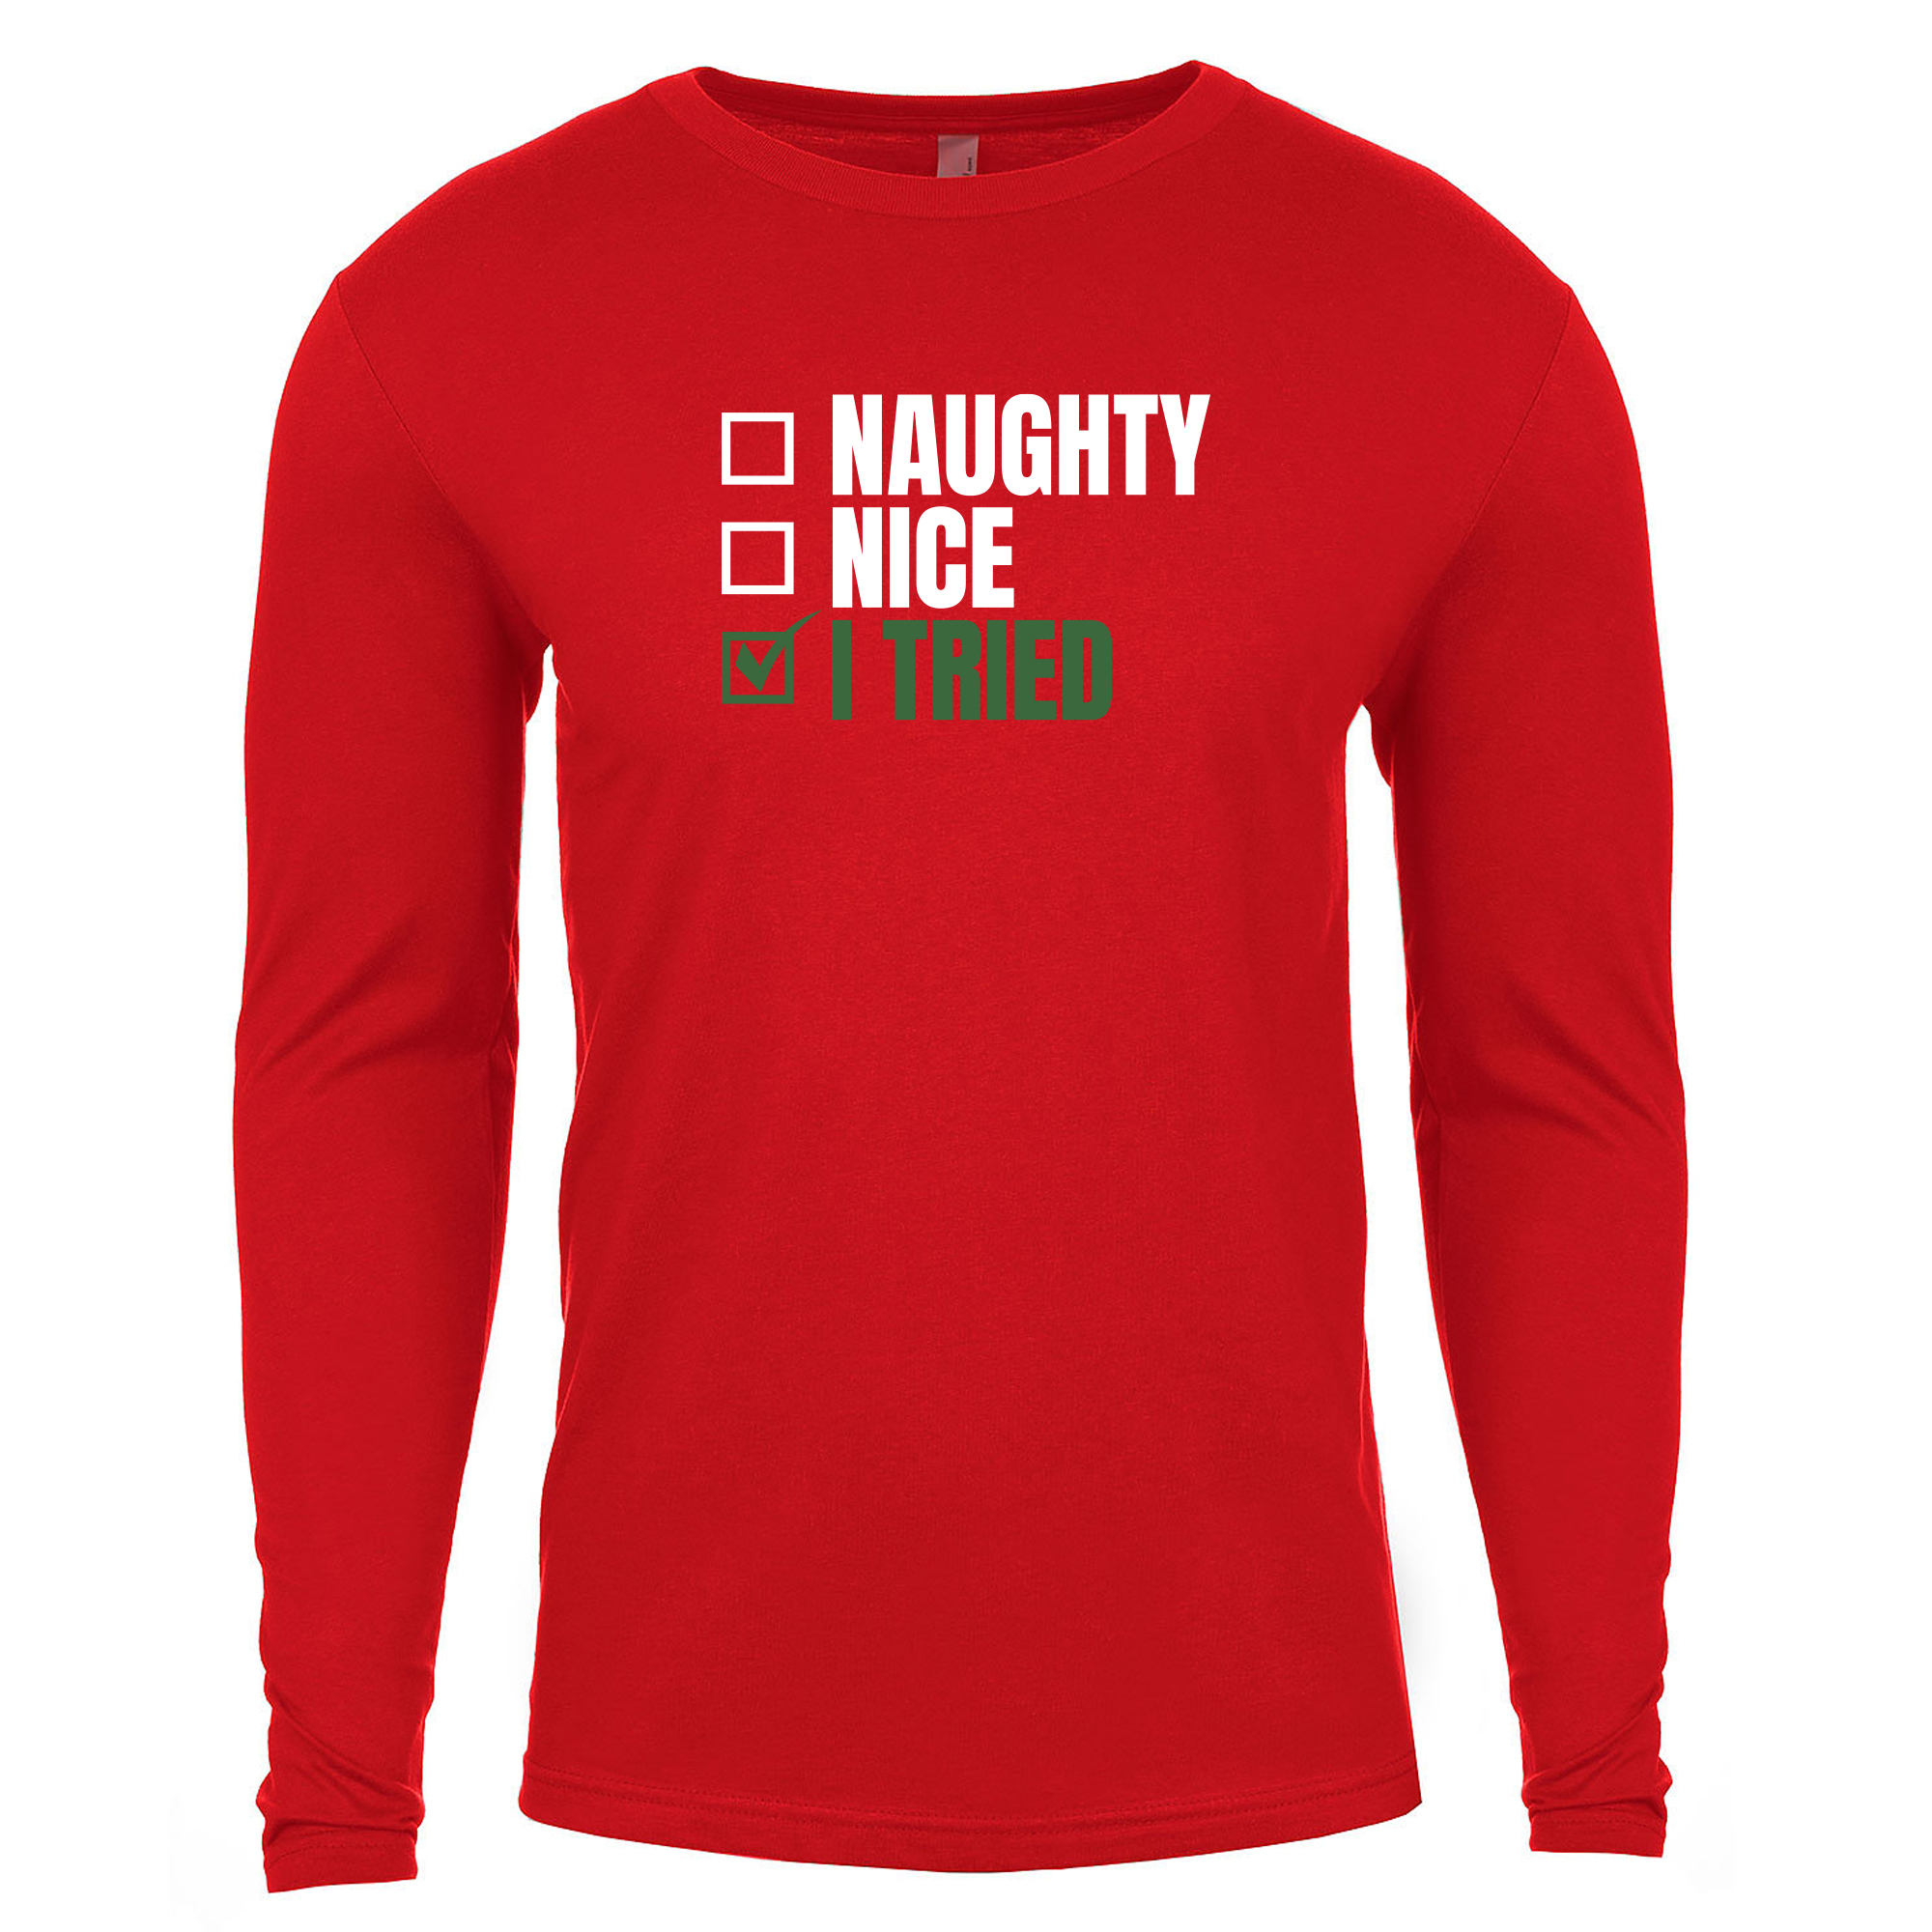 Mens Red Holiday Long Sleeve Shirt "Naught, Nice, I TRIED" Crown